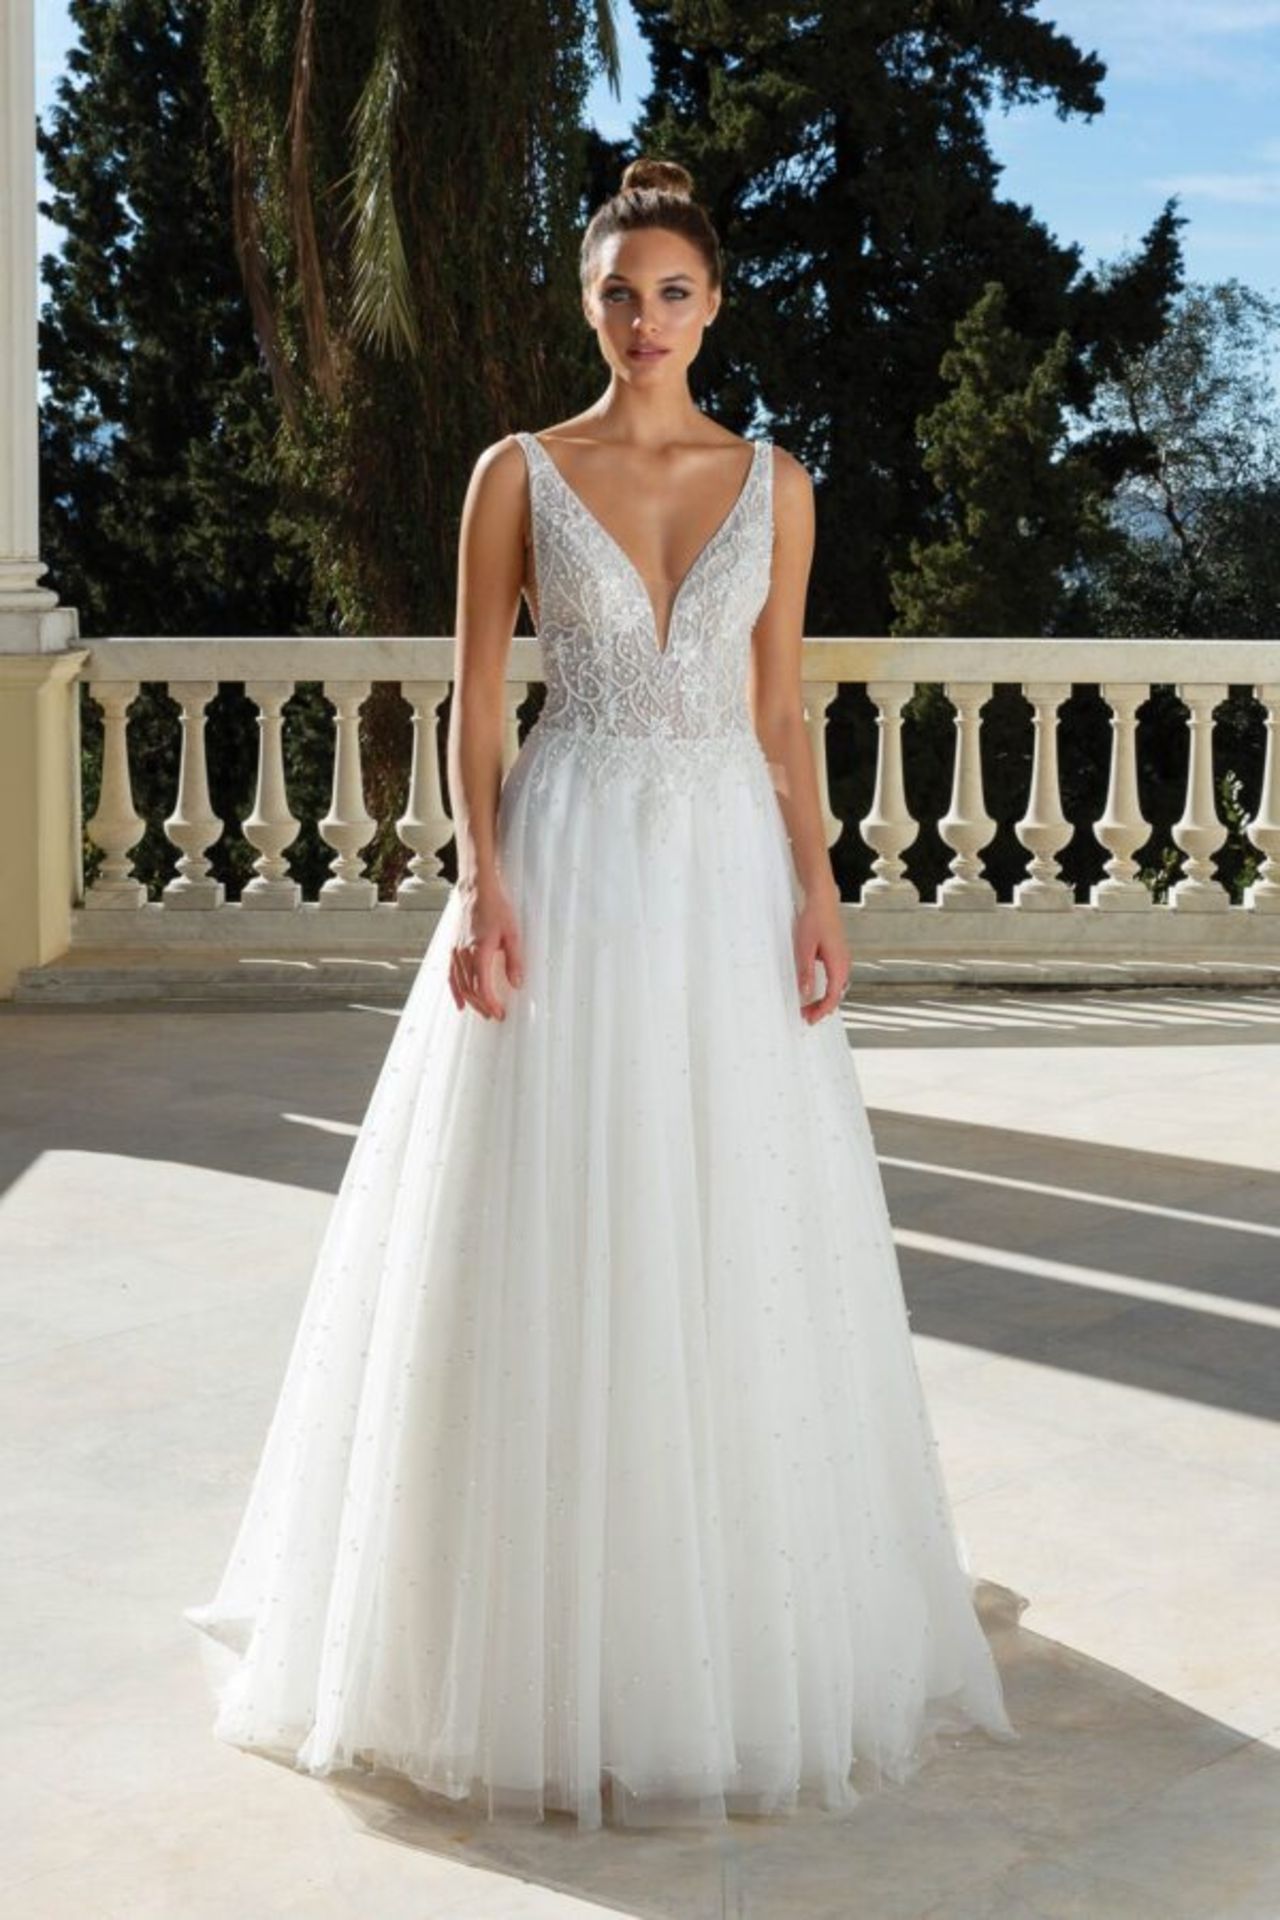 1 x Justin Alexander Designer Wedding Dress With Embroidered Bodice - Size 12 - RRP £1,600 - Image 8 of 8